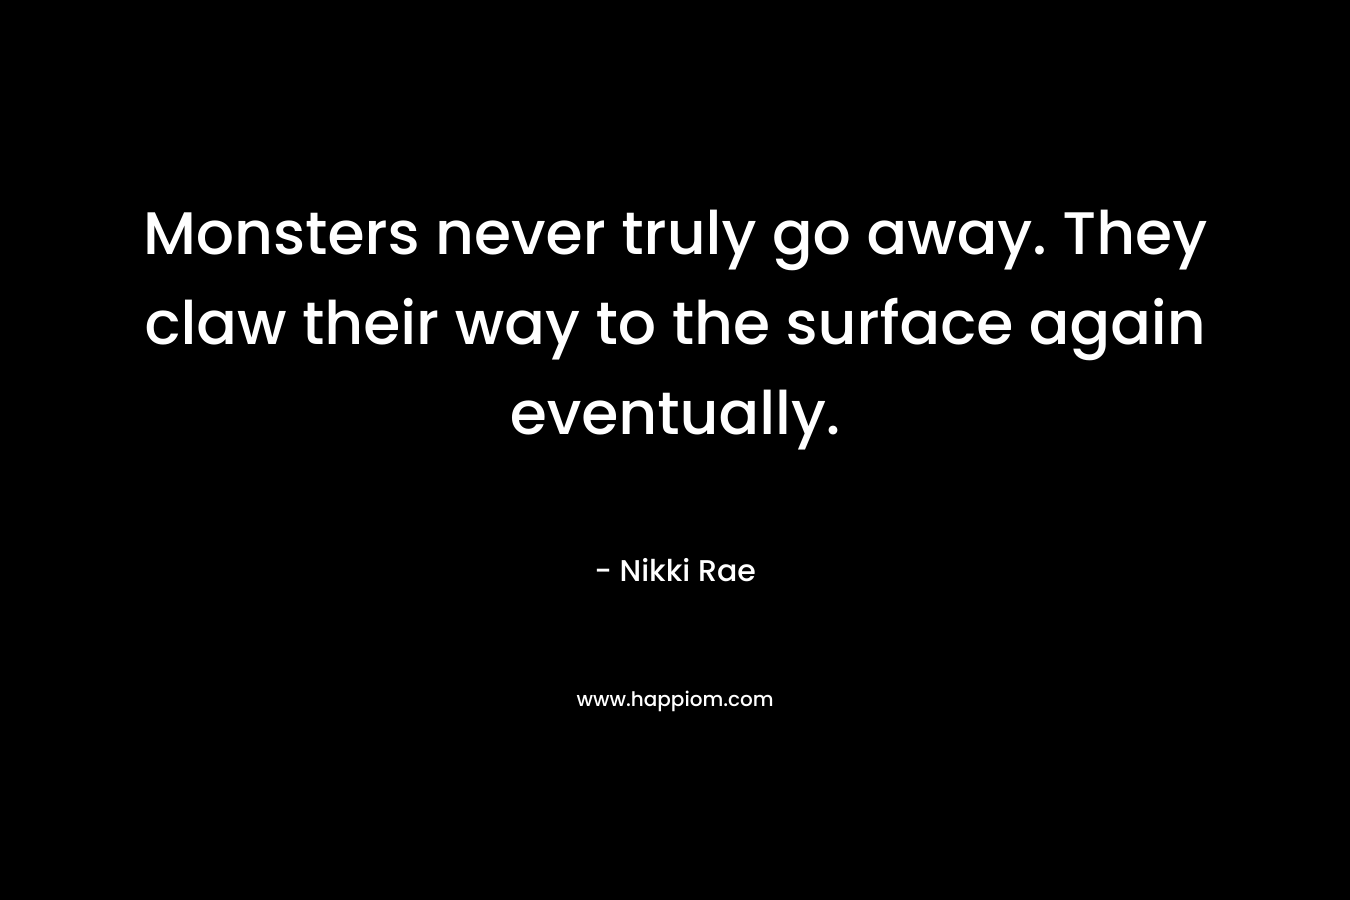 Monsters never truly go away. They claw their way to the surface again eventually.